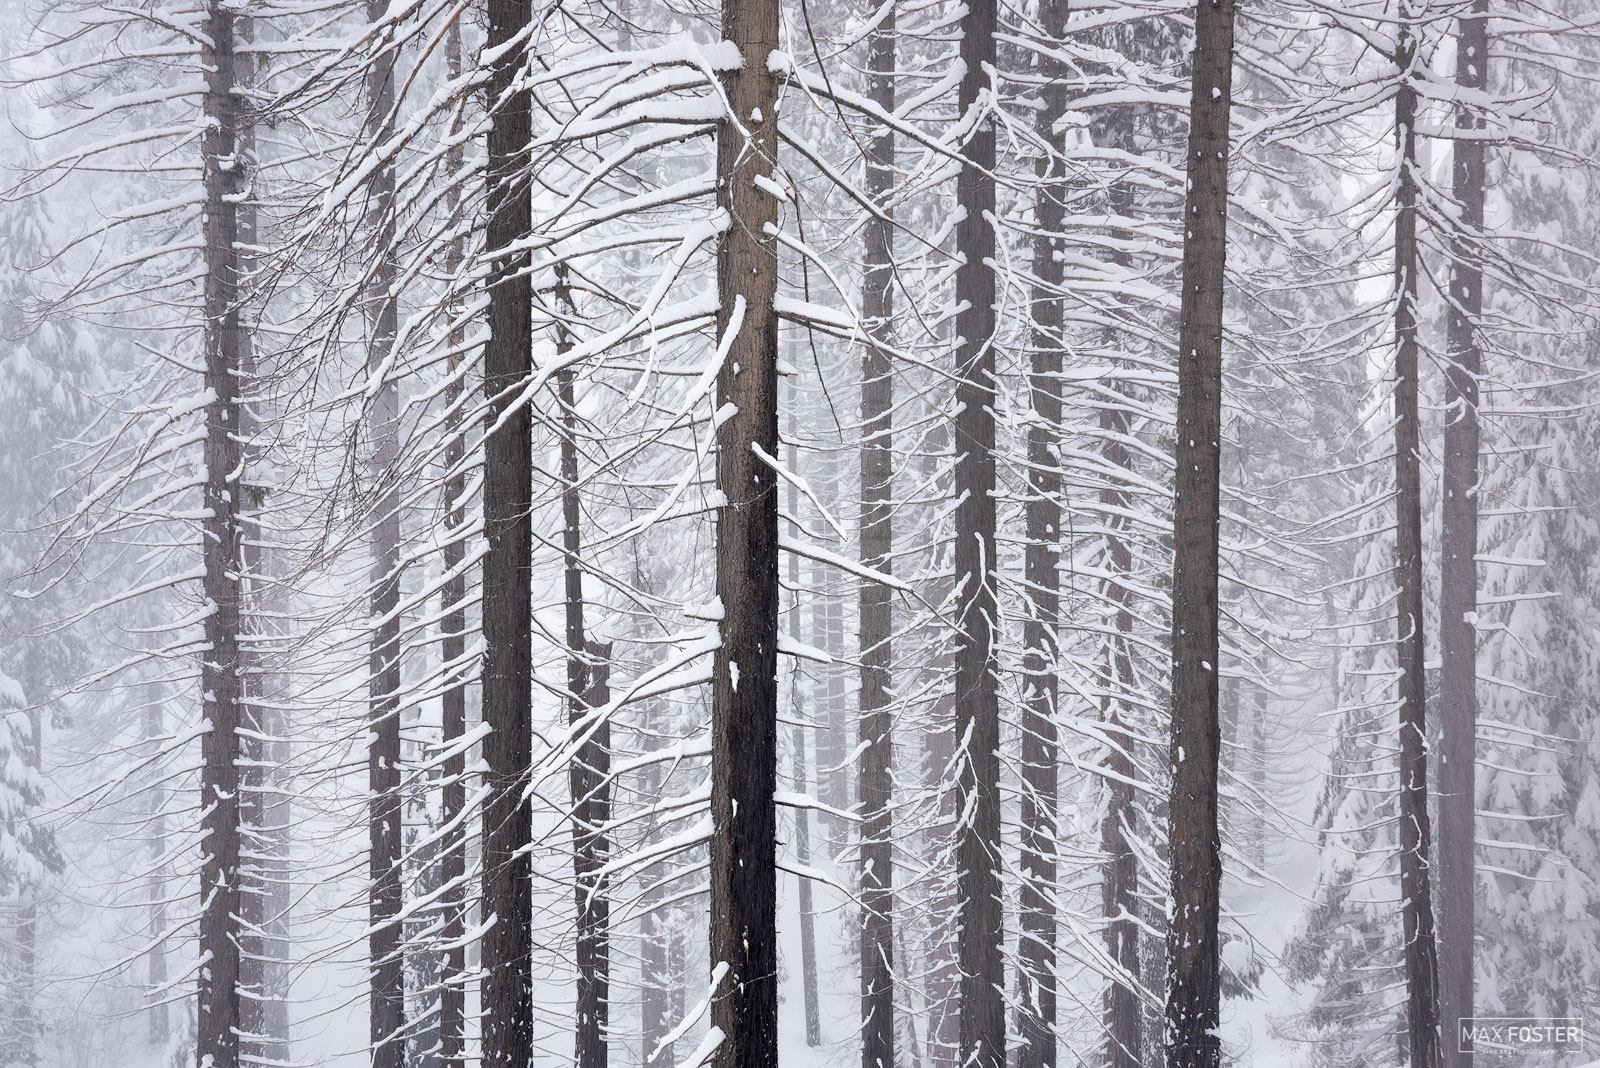 Bring your walls to life with Ghosts, Max Foster's limited edition photography print of winter in Sequoia & Kings Canyon National...